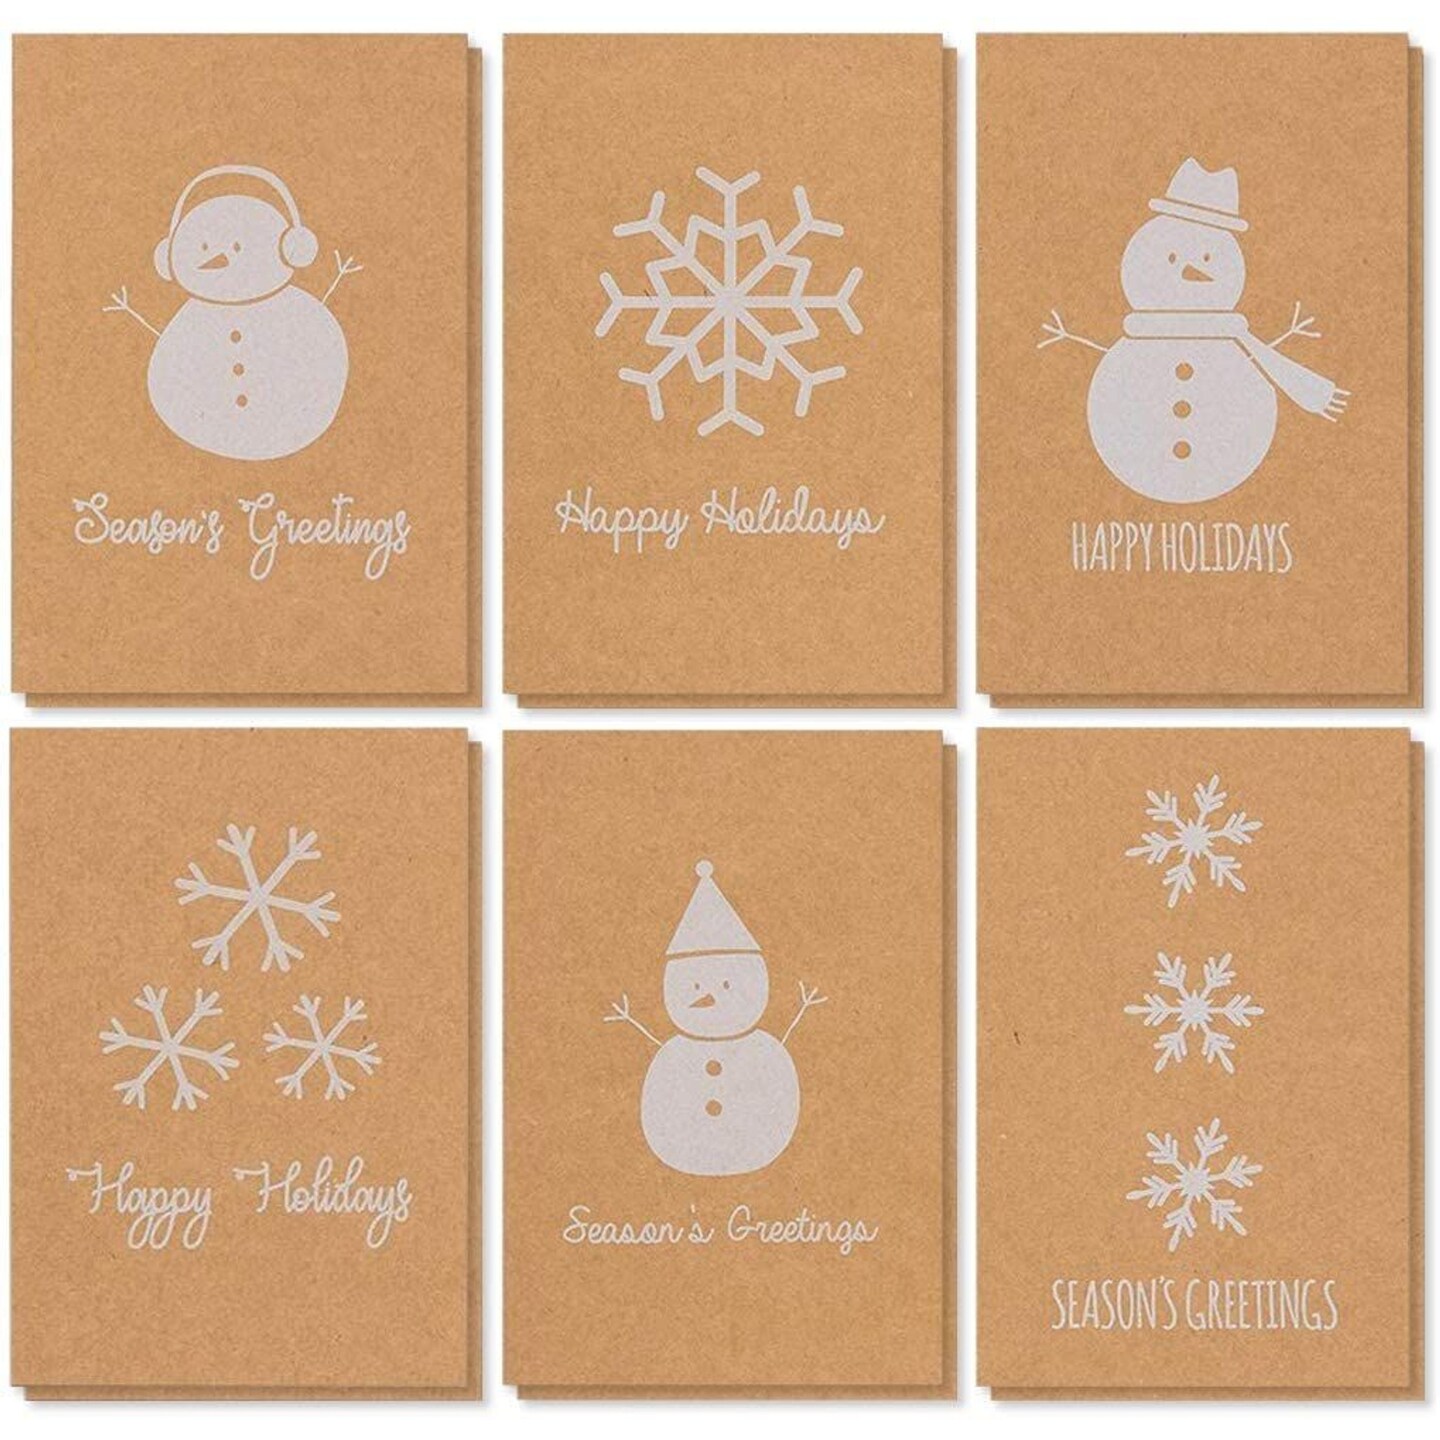 36 Pack Kraft Merry Christmas Greeting Cards Assortment with Envelopes, Holiday Yuletide Designs (4 x 6 In)